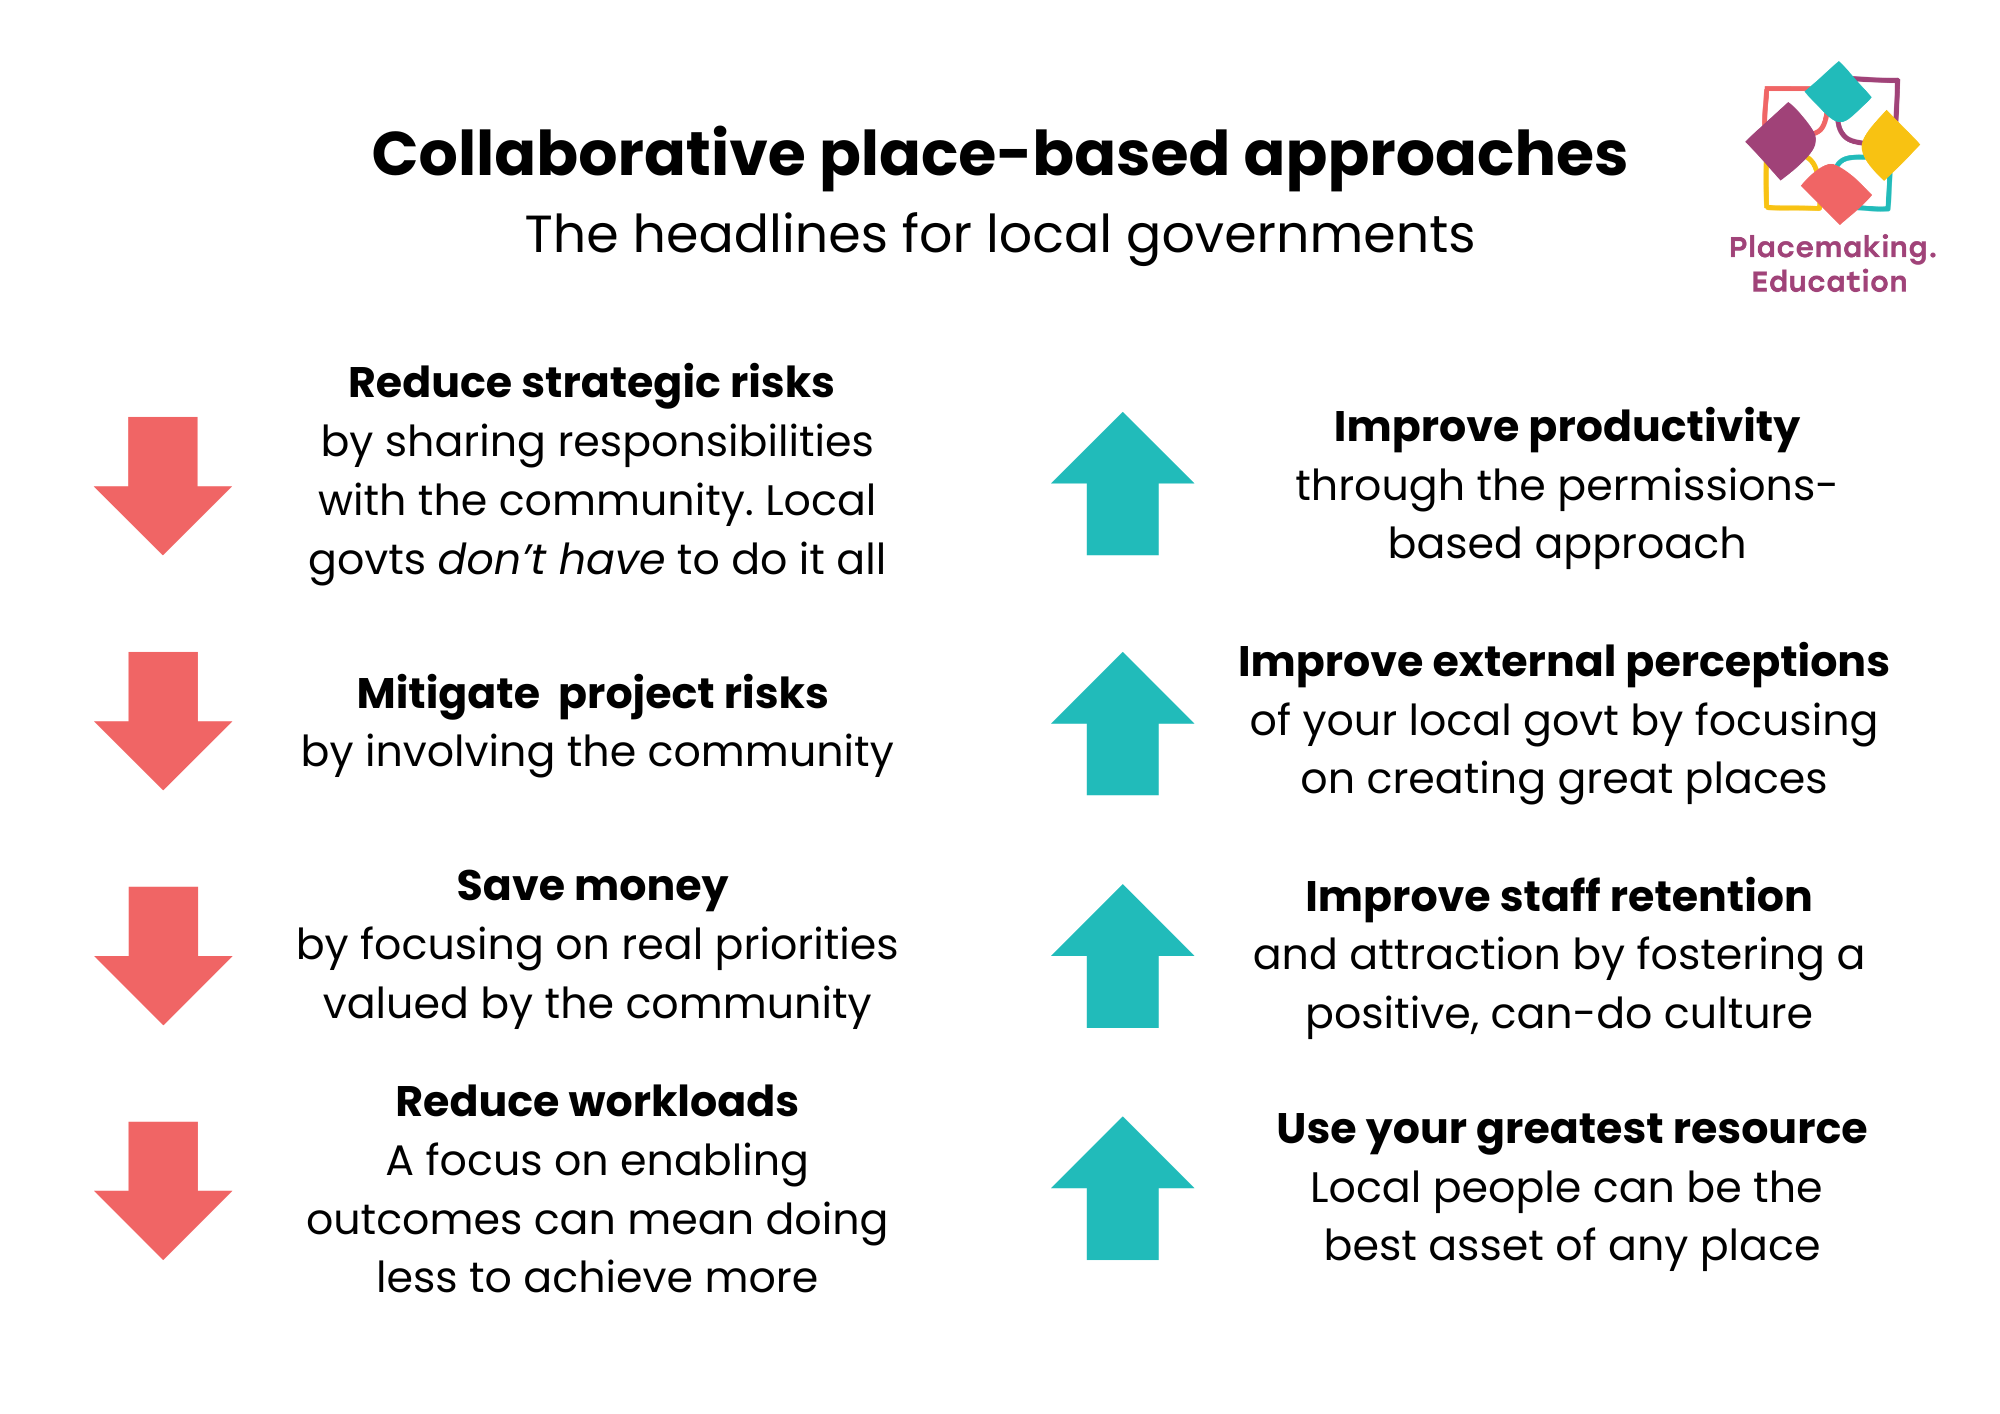 Graphic showing the benefits of collaborative place-based approaches for local governments